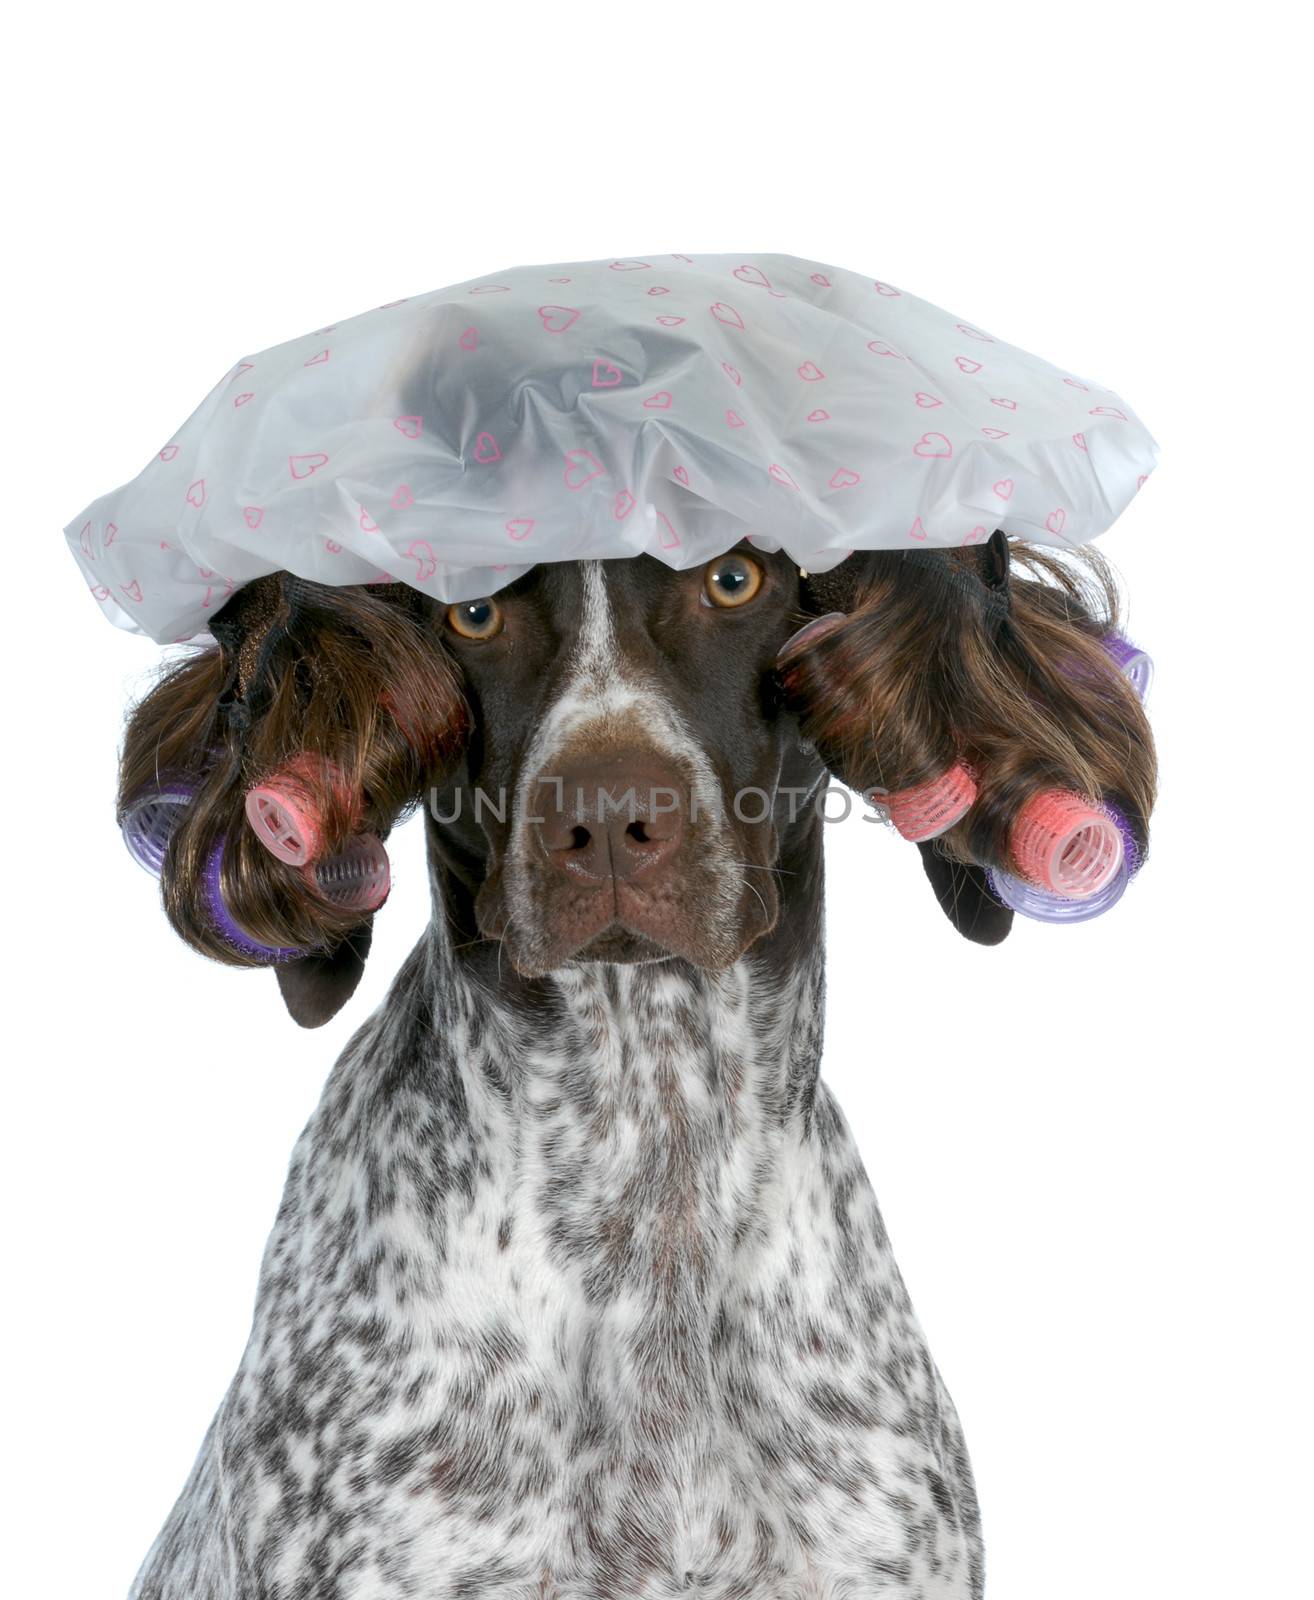 dog grooming - german shorthaired pointer wearing wig with curlers and shower cap isolated on white background